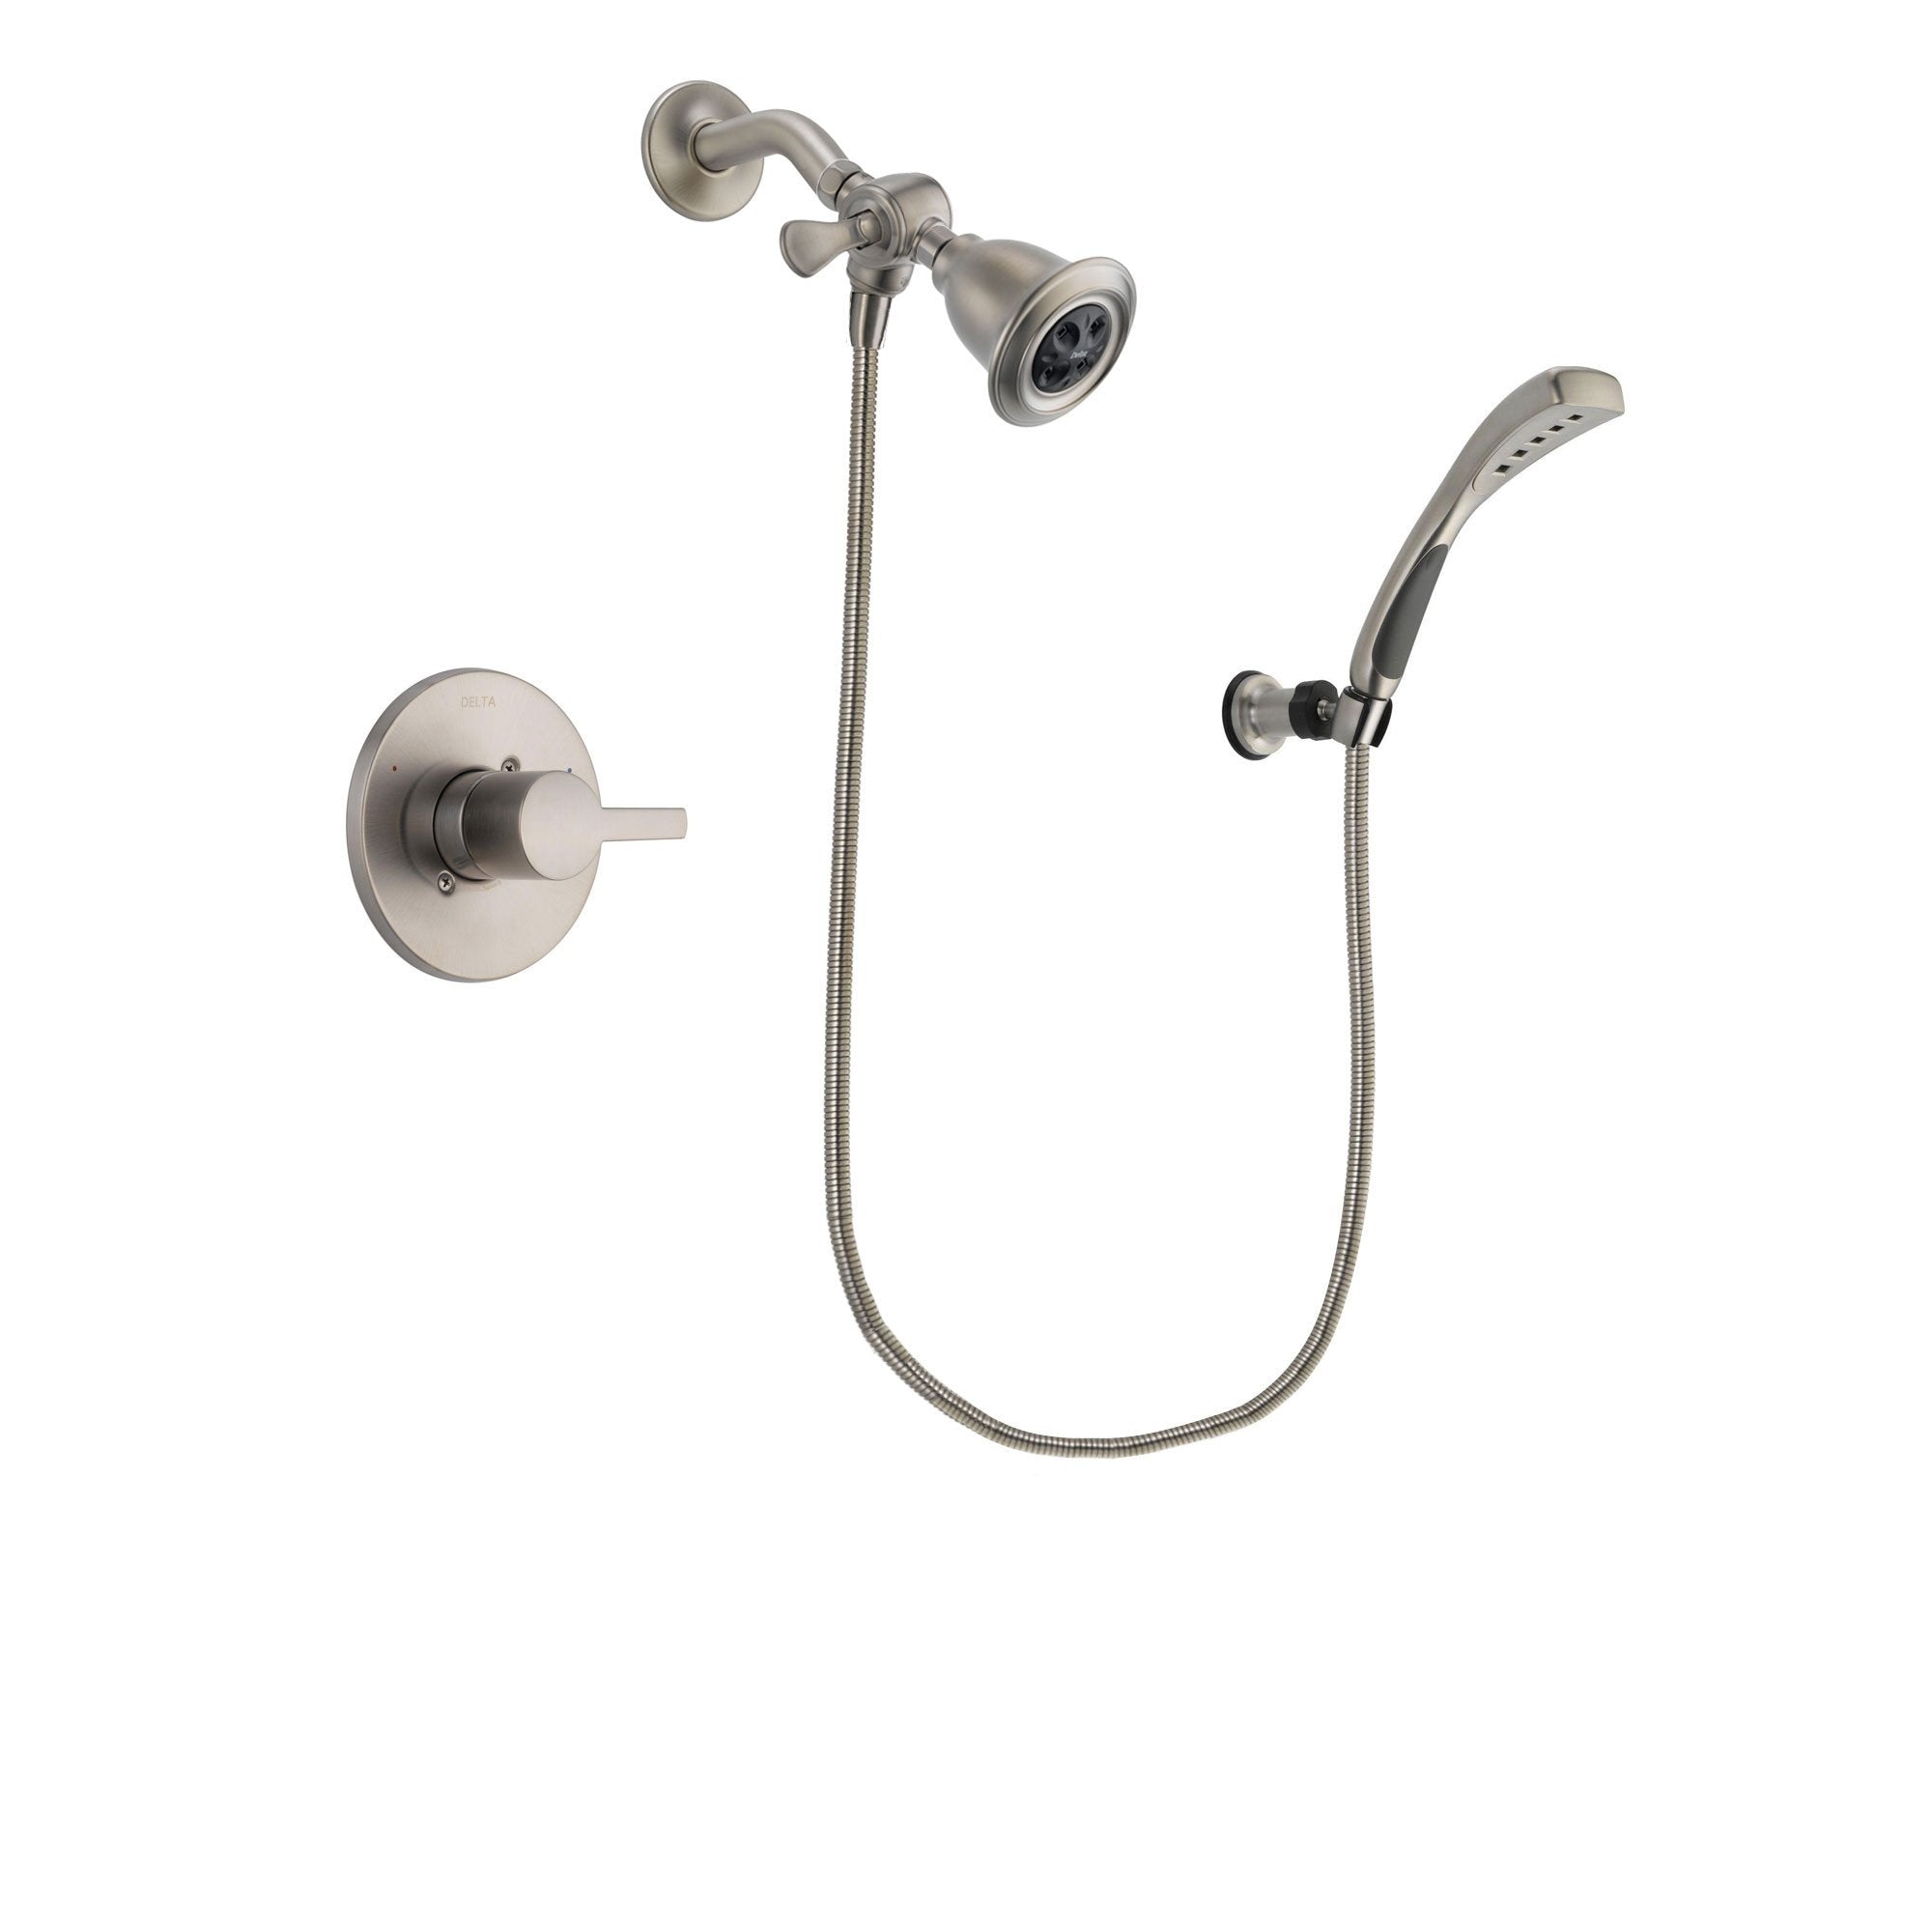 Delta Compel Stainless Steel Finish Shower Faucet System Package with Water Efficient Showerhead and Wall Mounted Handshower Includes Rough-in Valve DSP1834V